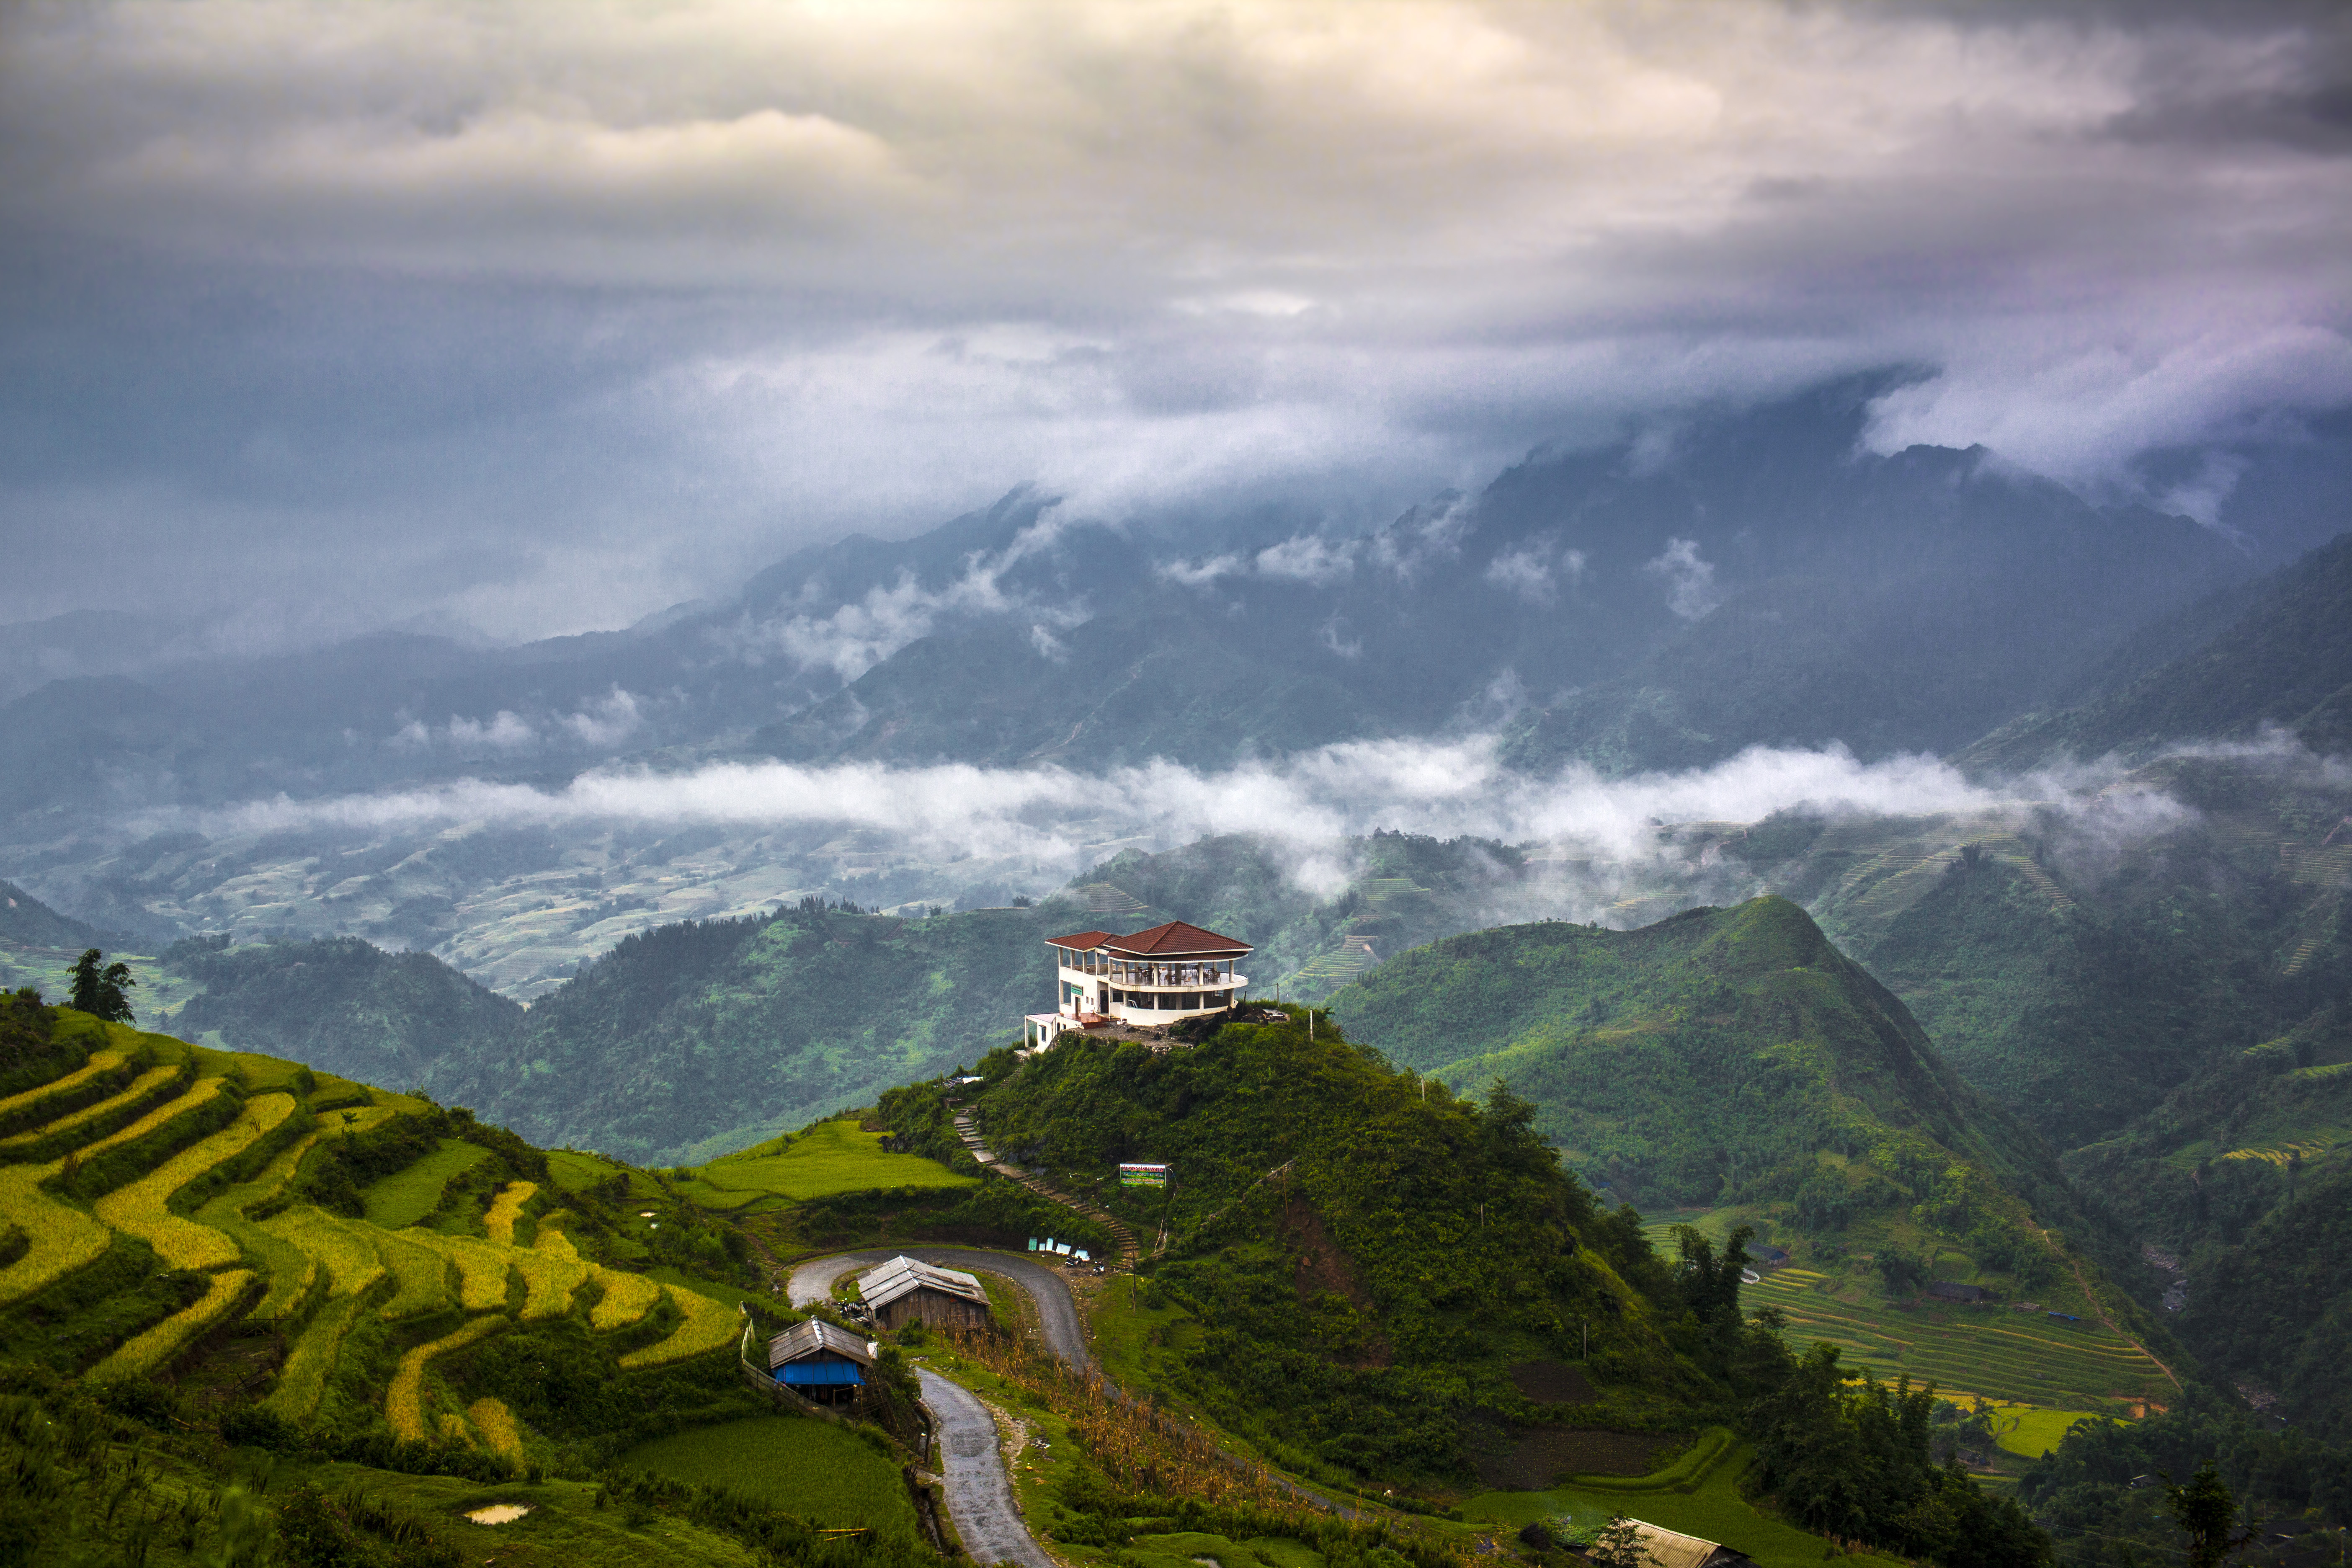  tea plantation a house in the mountains wallpapers photos pictures 5616x3744